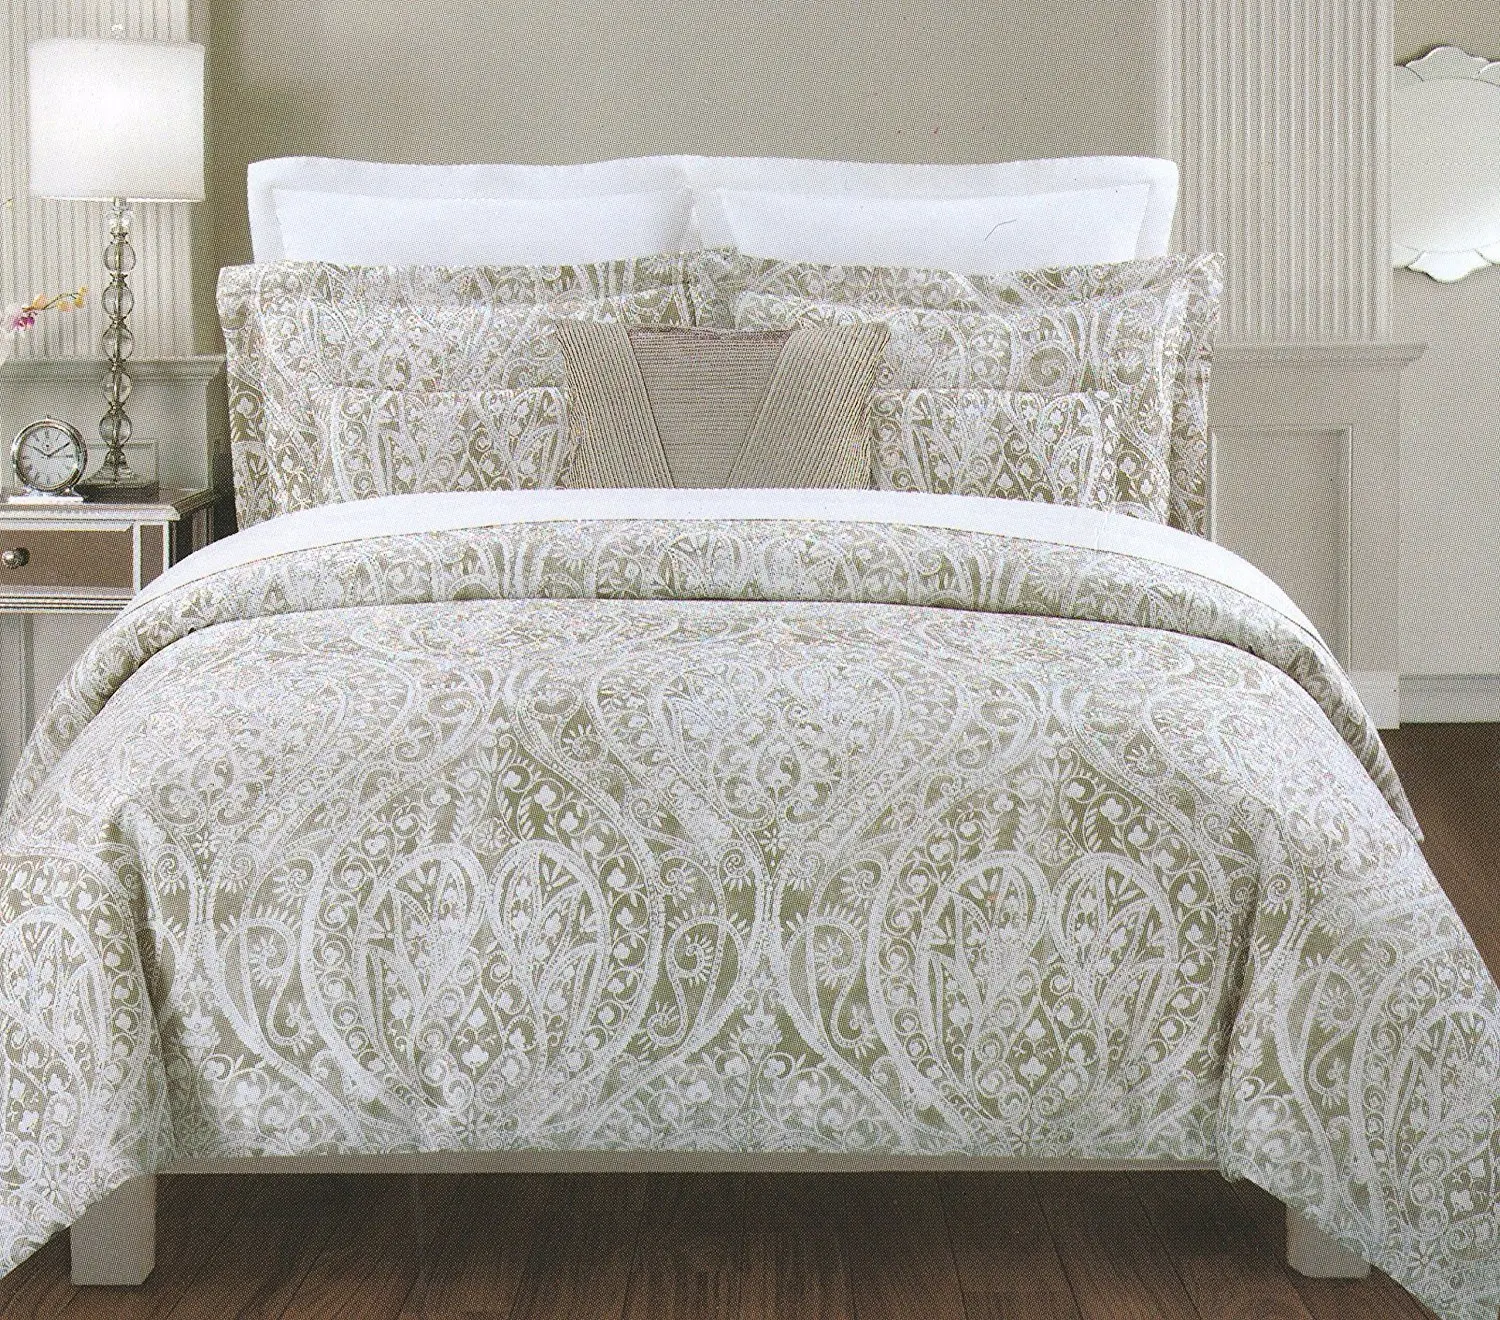 Buy Tahari Home Vintage Silver Foliage 3pc Full Queen Duvet Cover Set ...